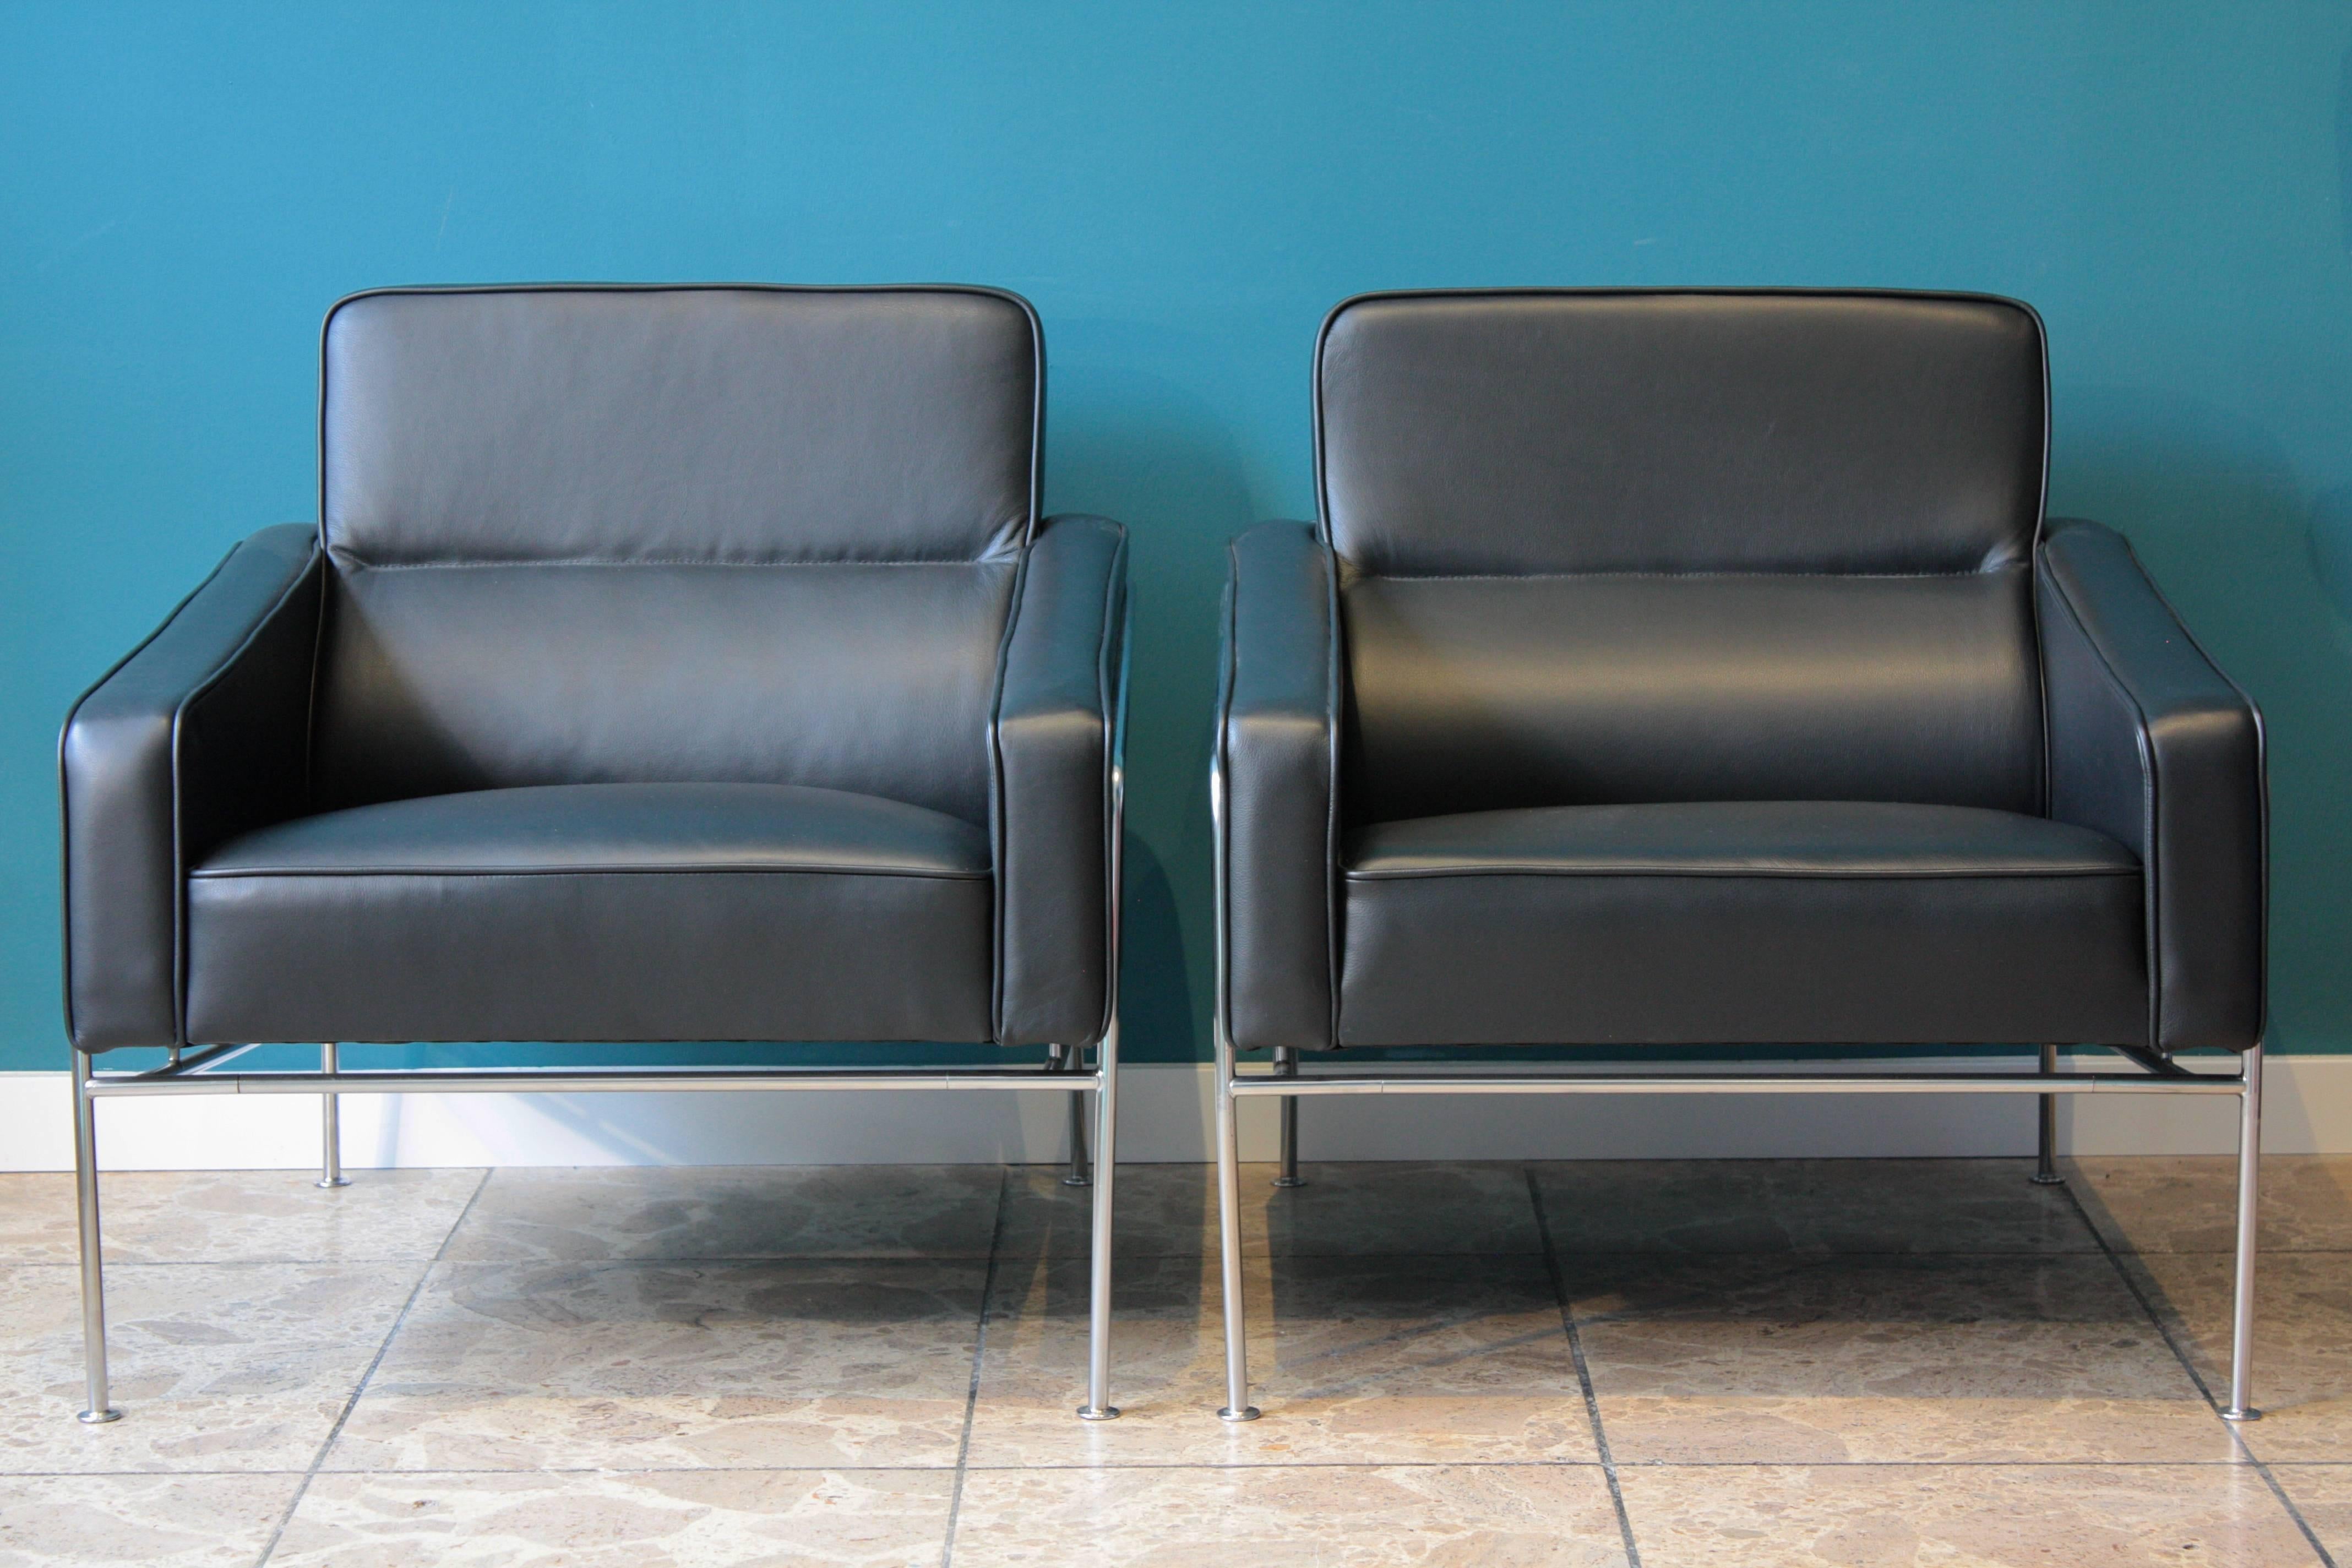 Two Airport chairs, model 3300, designed by Arne Jacobsen and produced by Fritz Hansen, professionally reupholstered in black semi-aniline leather, chromed steel frame. The series was produced for the SAS Terminal at the Royal Hotel in Copenhagen,